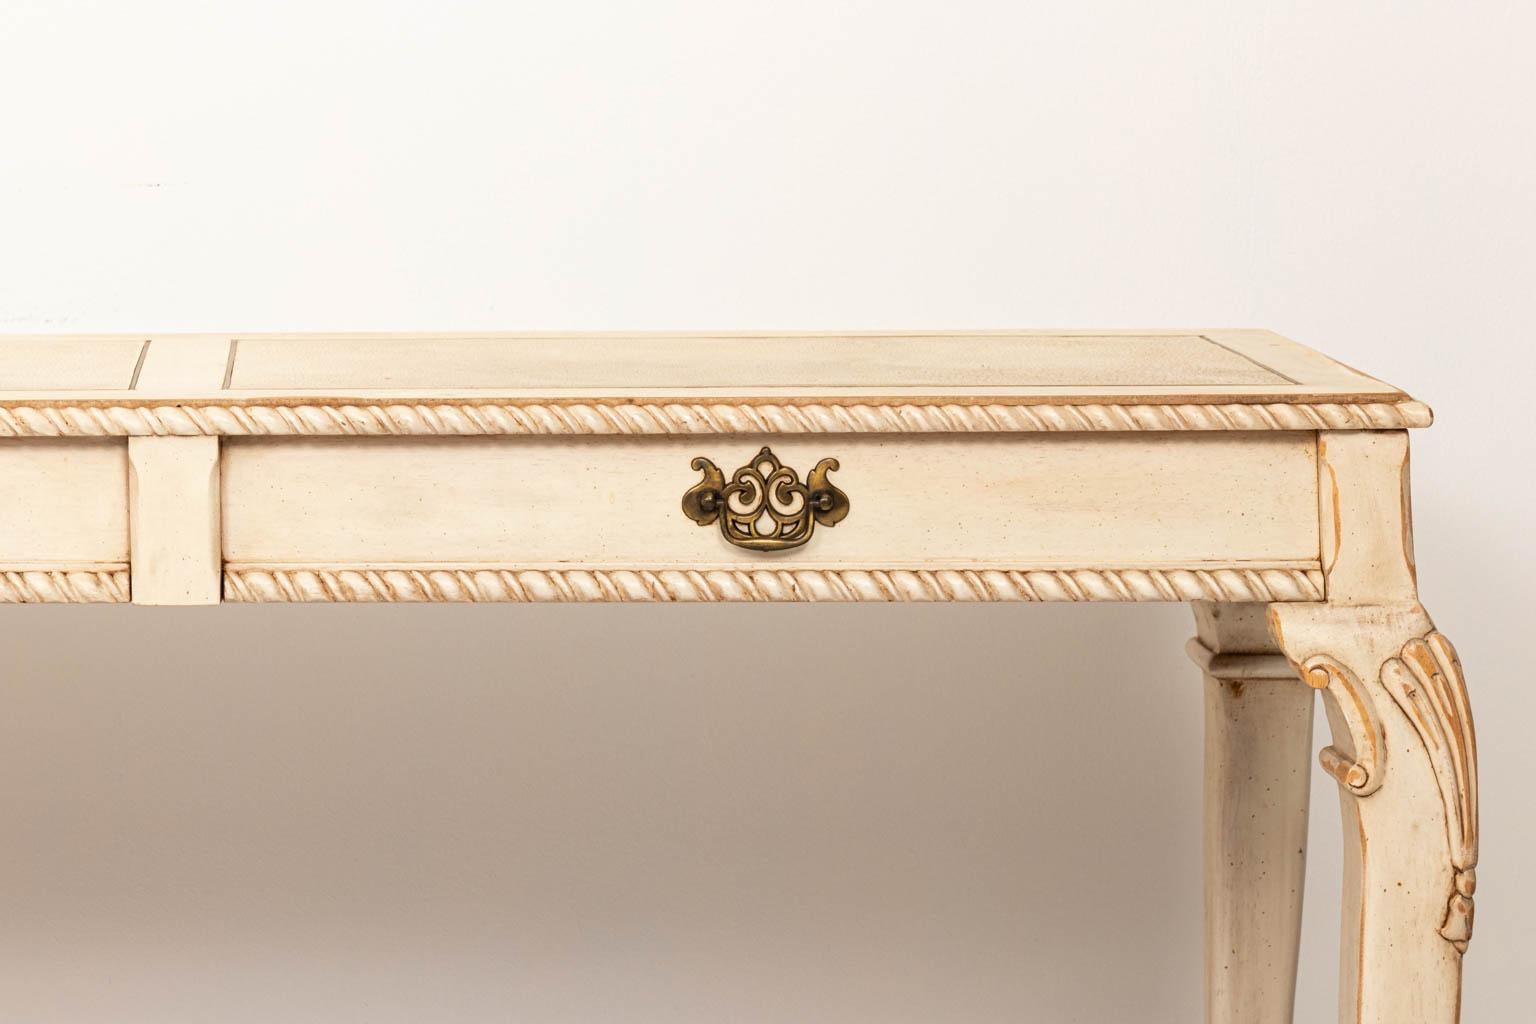 Chippendale ball and claw console table on casters. Inlaid brass on top. Painted off-white distressed finish
Good condition, wear to painted finish from age and use.